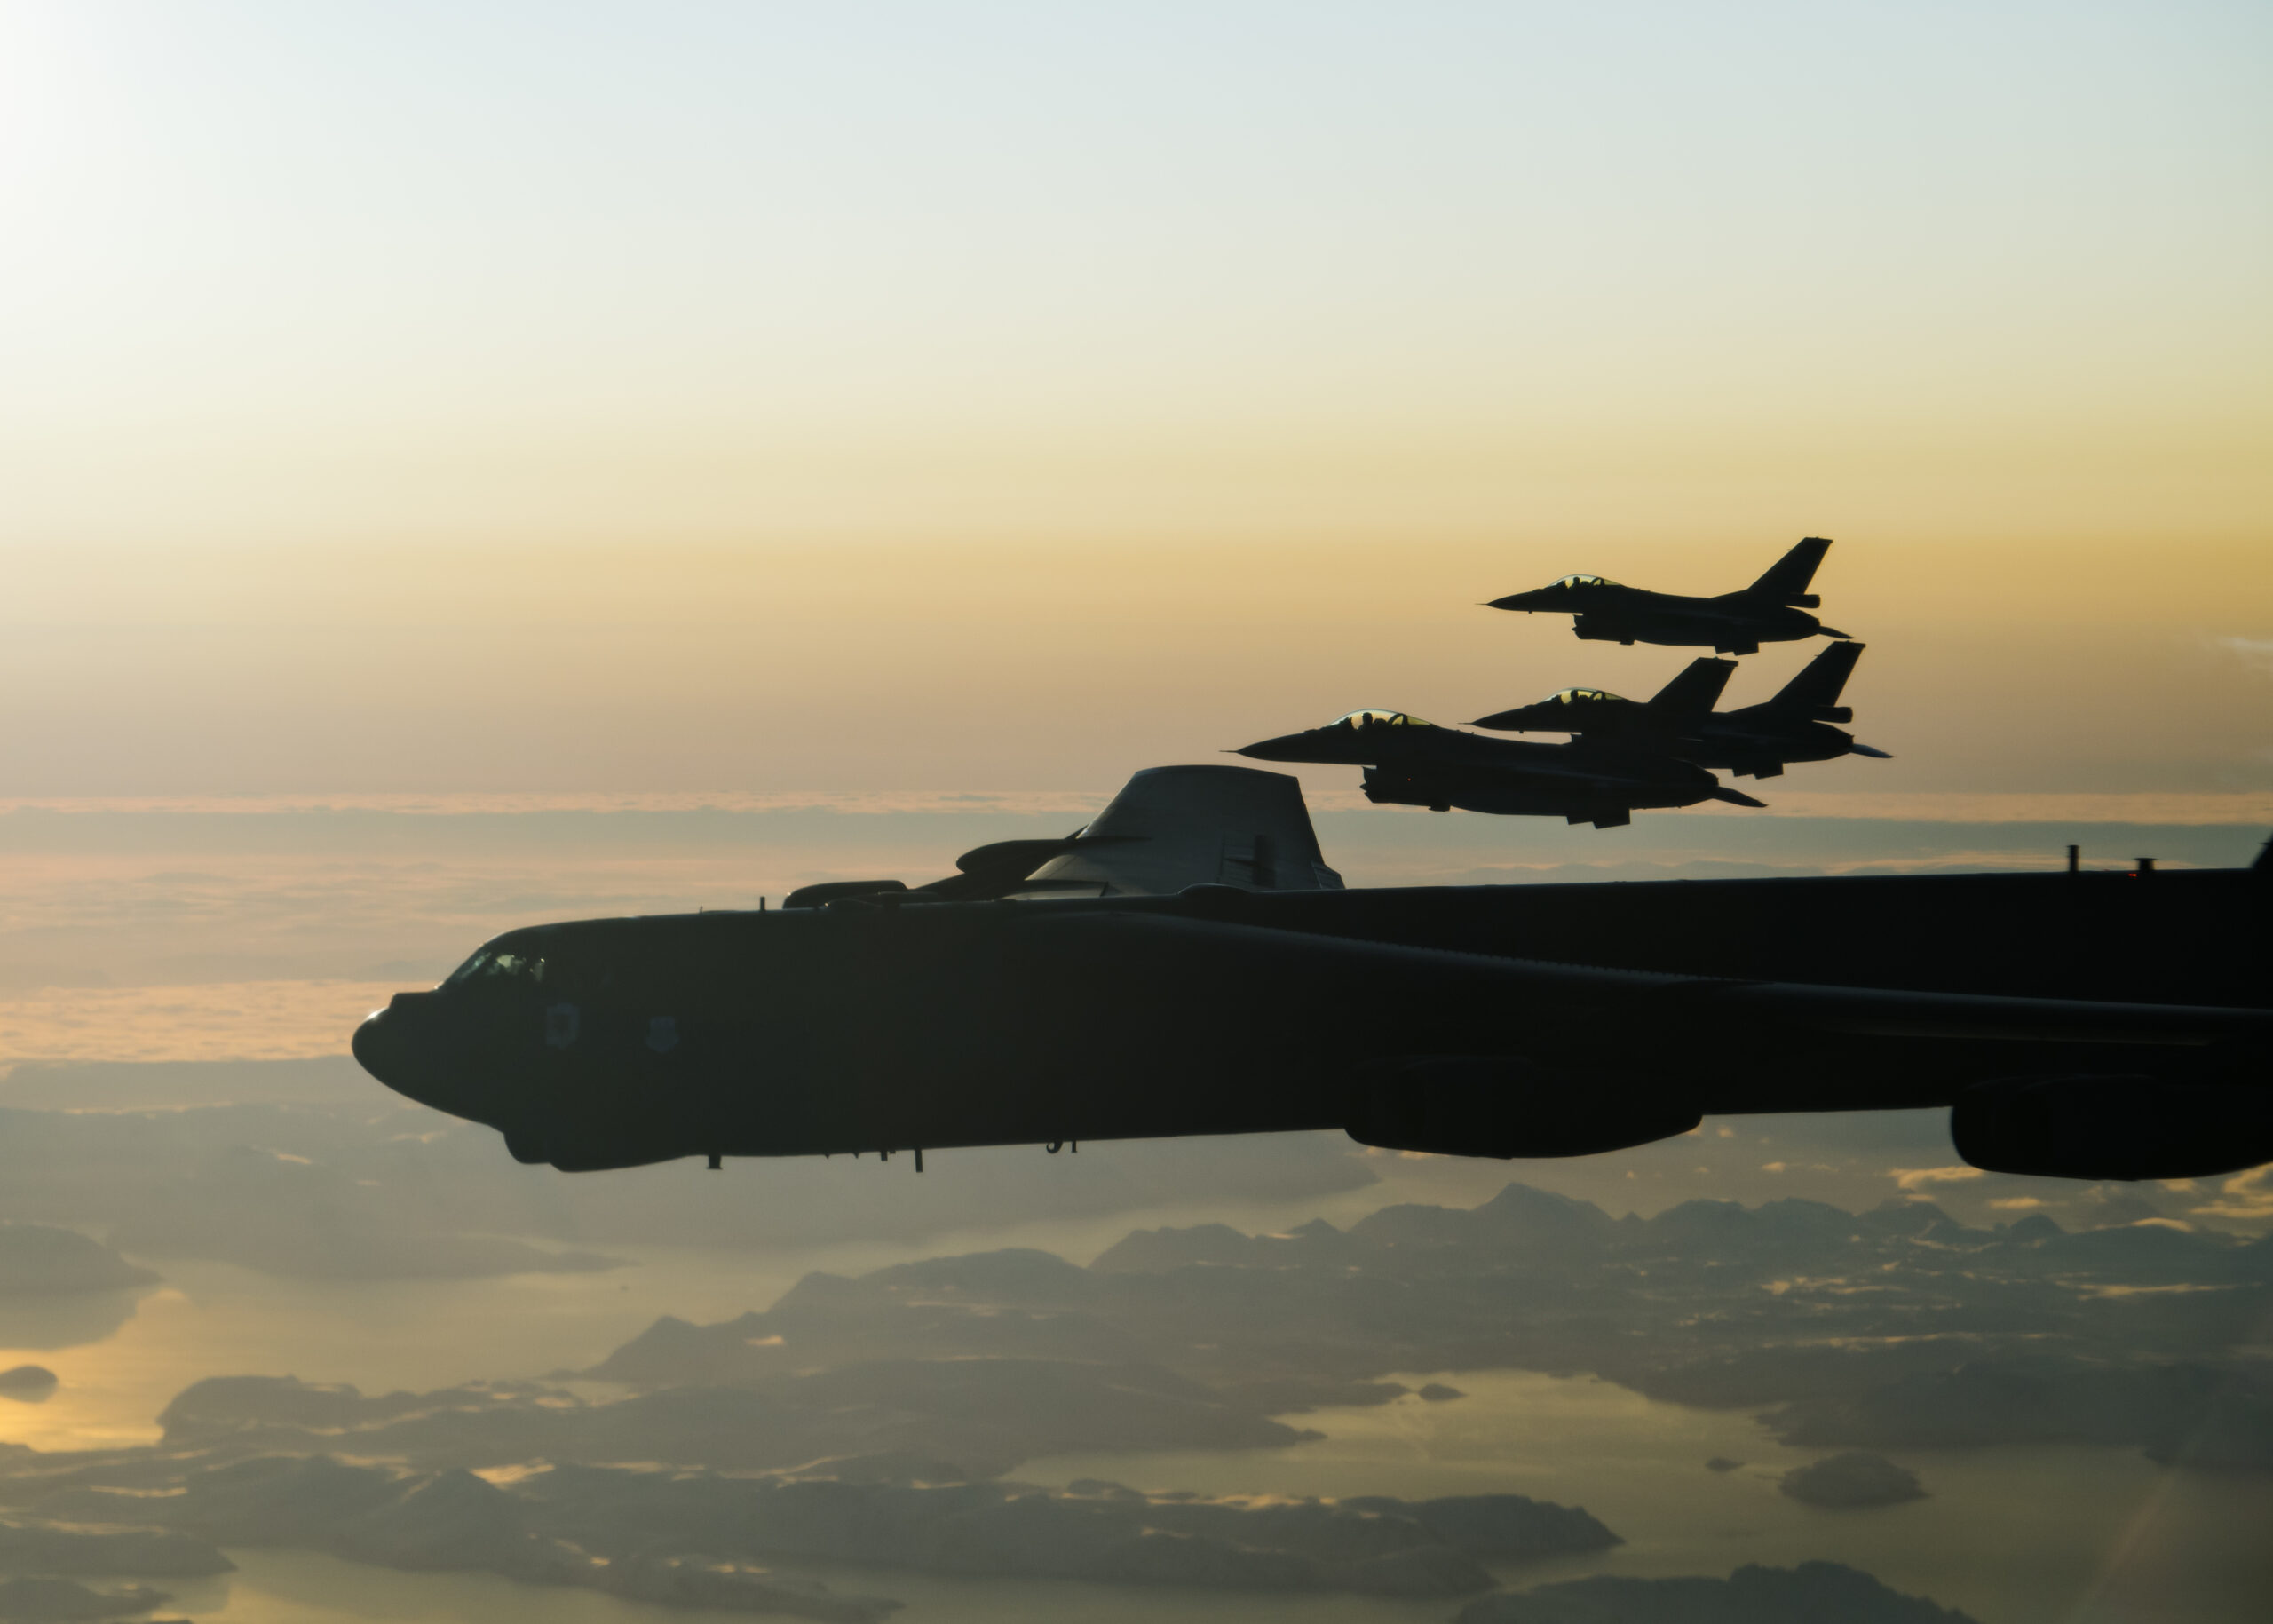 Norway Flies With B-52s Above Arctic; IOC For Their F-35s